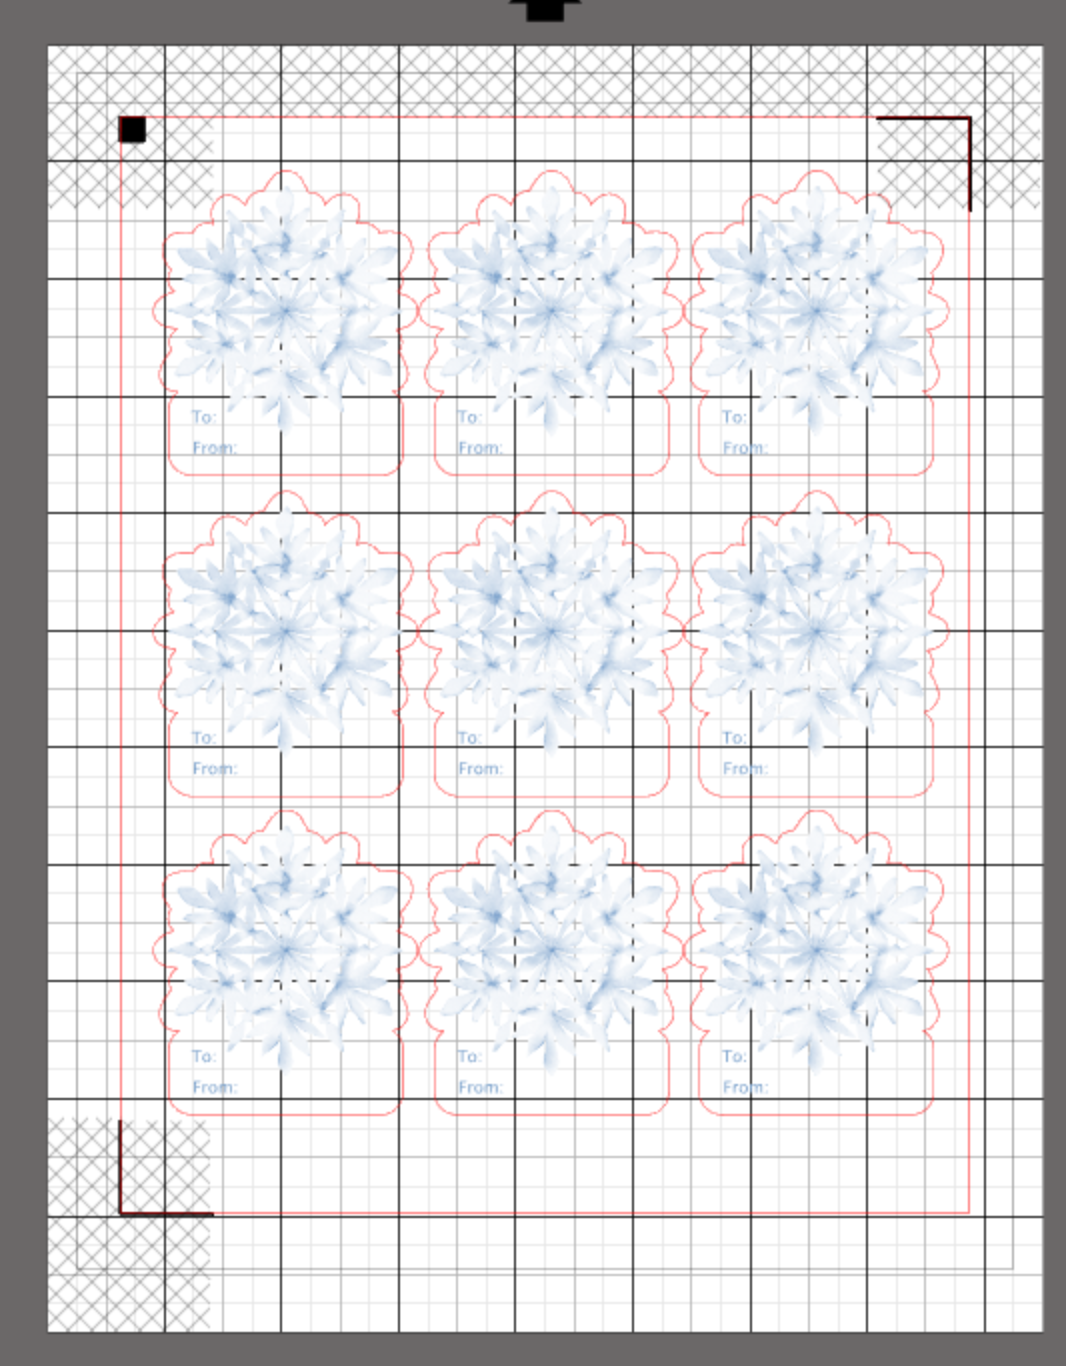 Print and Cut Snowflake Stickers